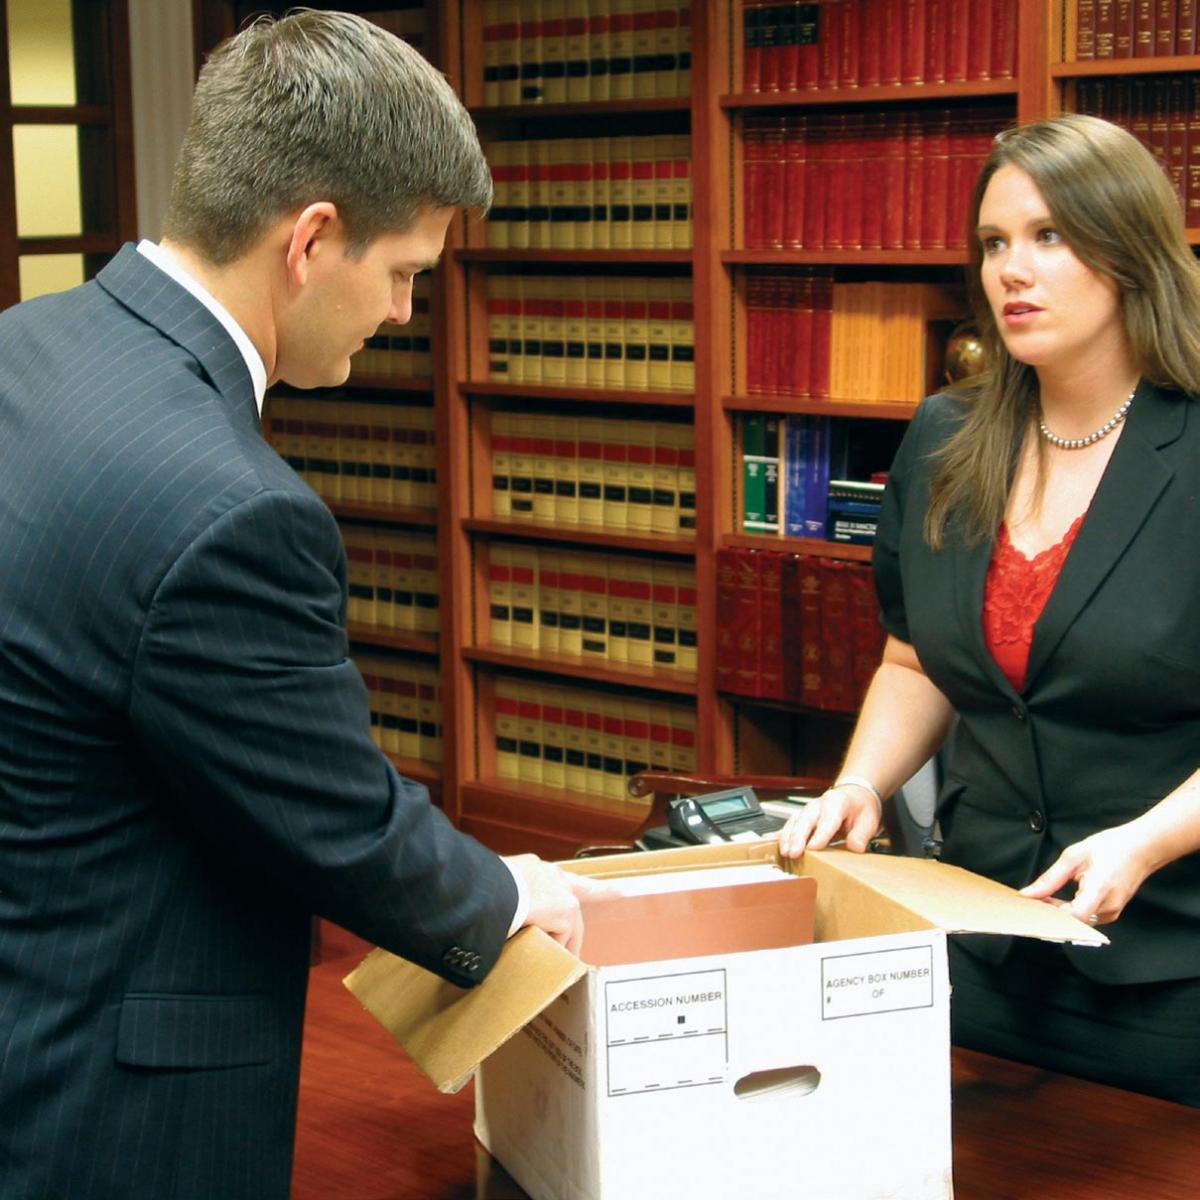 A female lawyer shares documents with a male lawyer during discovery.